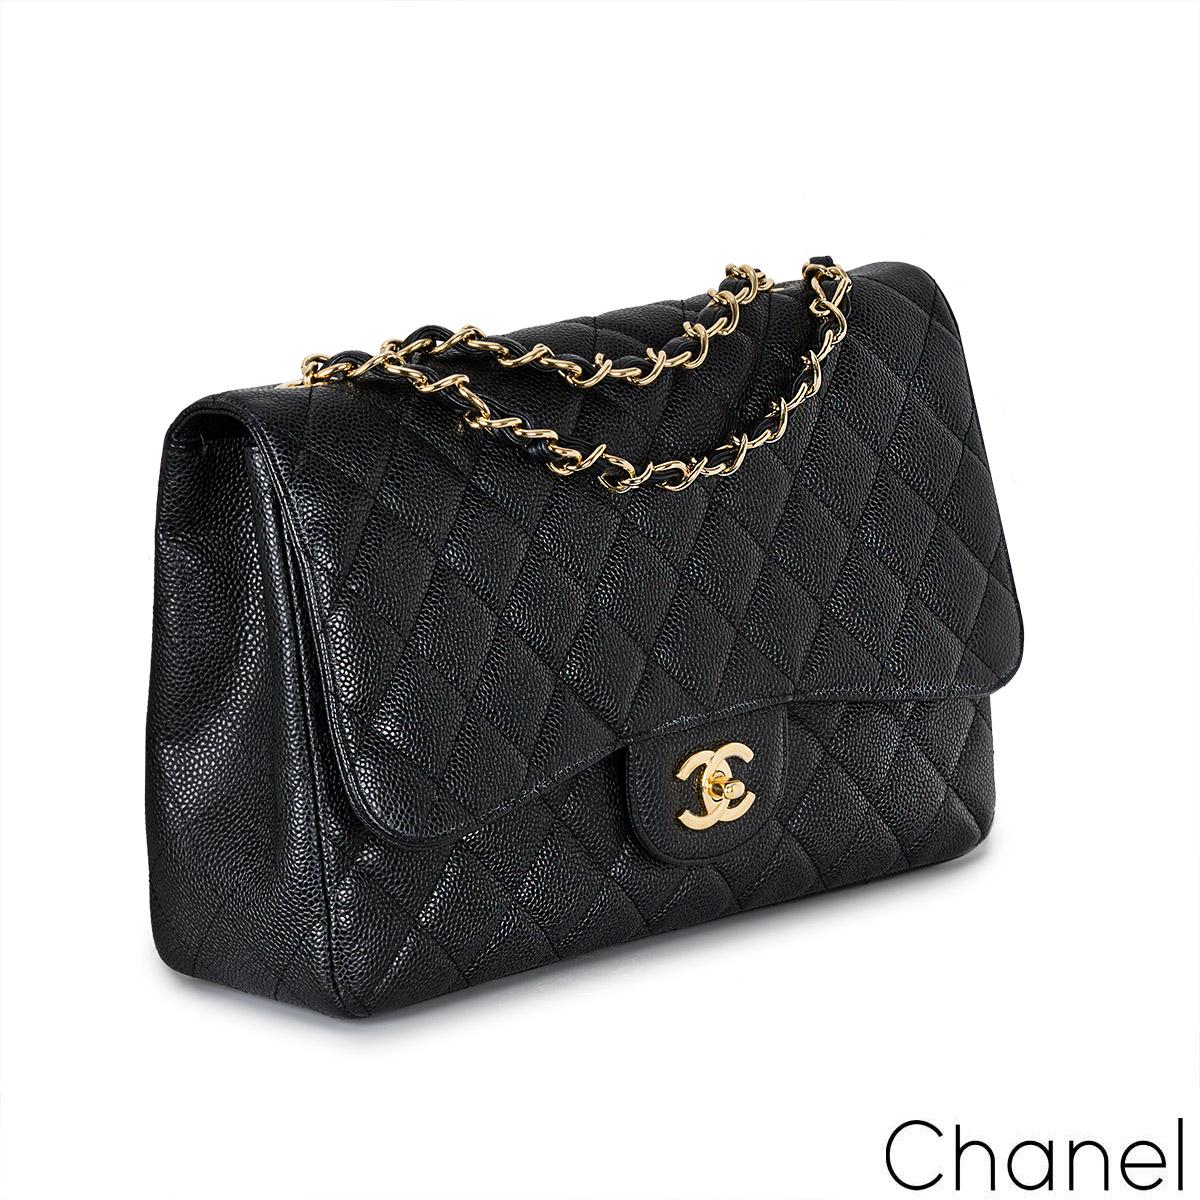 Chanel Black Caviar Jumbo Classic Single Flap Bag In Excellent Condition For Sale In London, GB